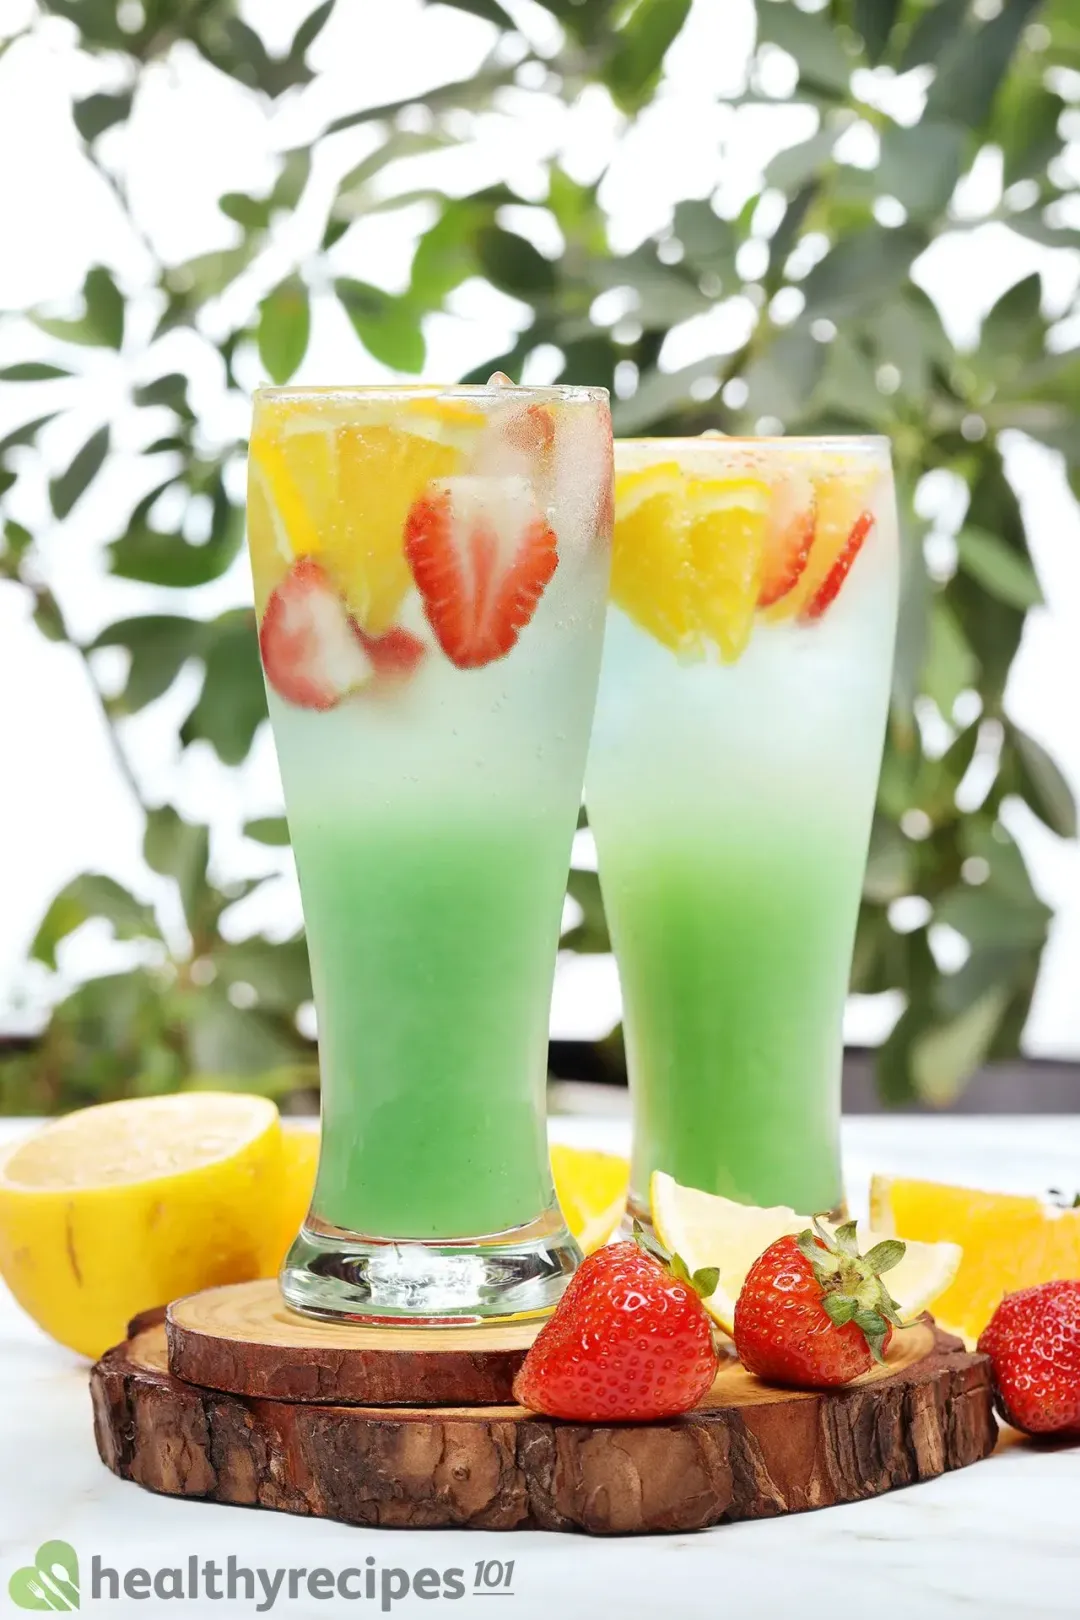 In front of a tree, two glasses of a green jungle juice cocktail put next to whole strawberries and whole lemons